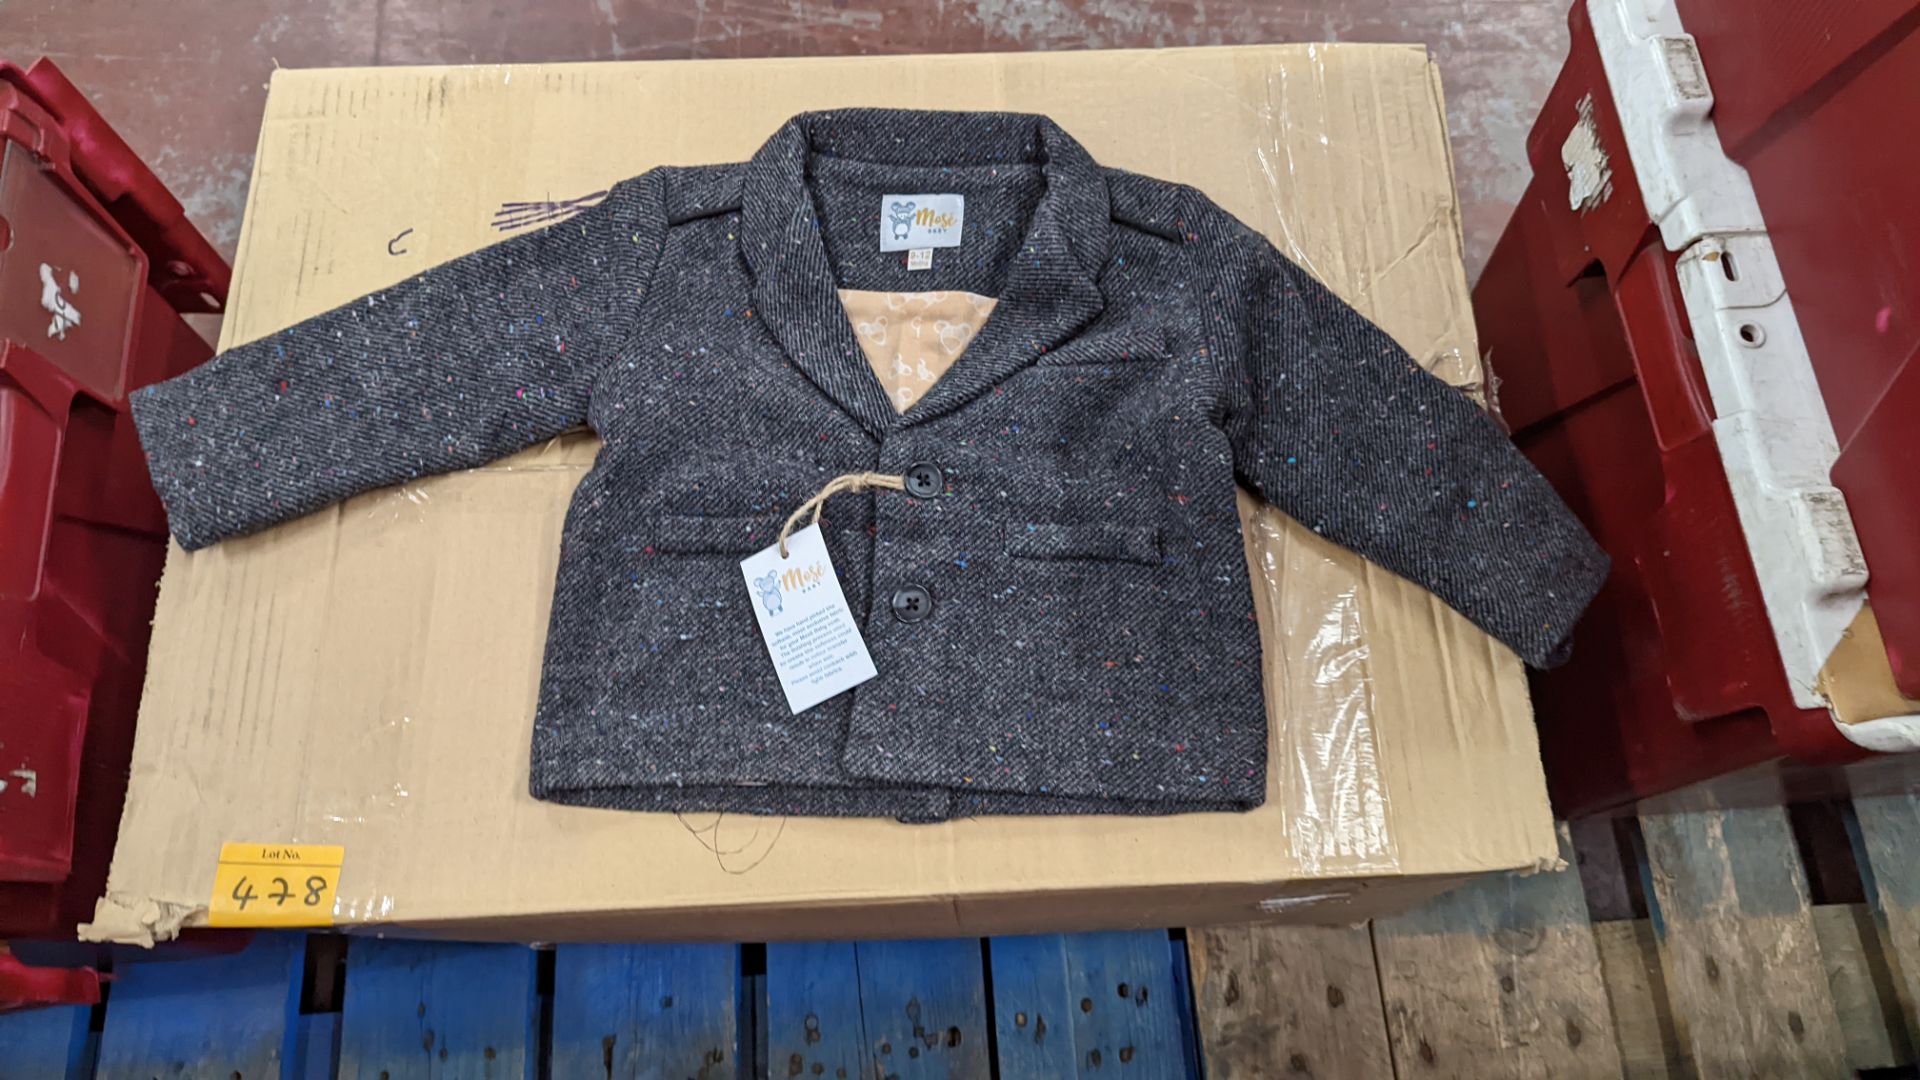 40 off Mosé Baby boy's blazers in grey/black with speckled colours running throughout with Mosé Baby - Image 7 of 9